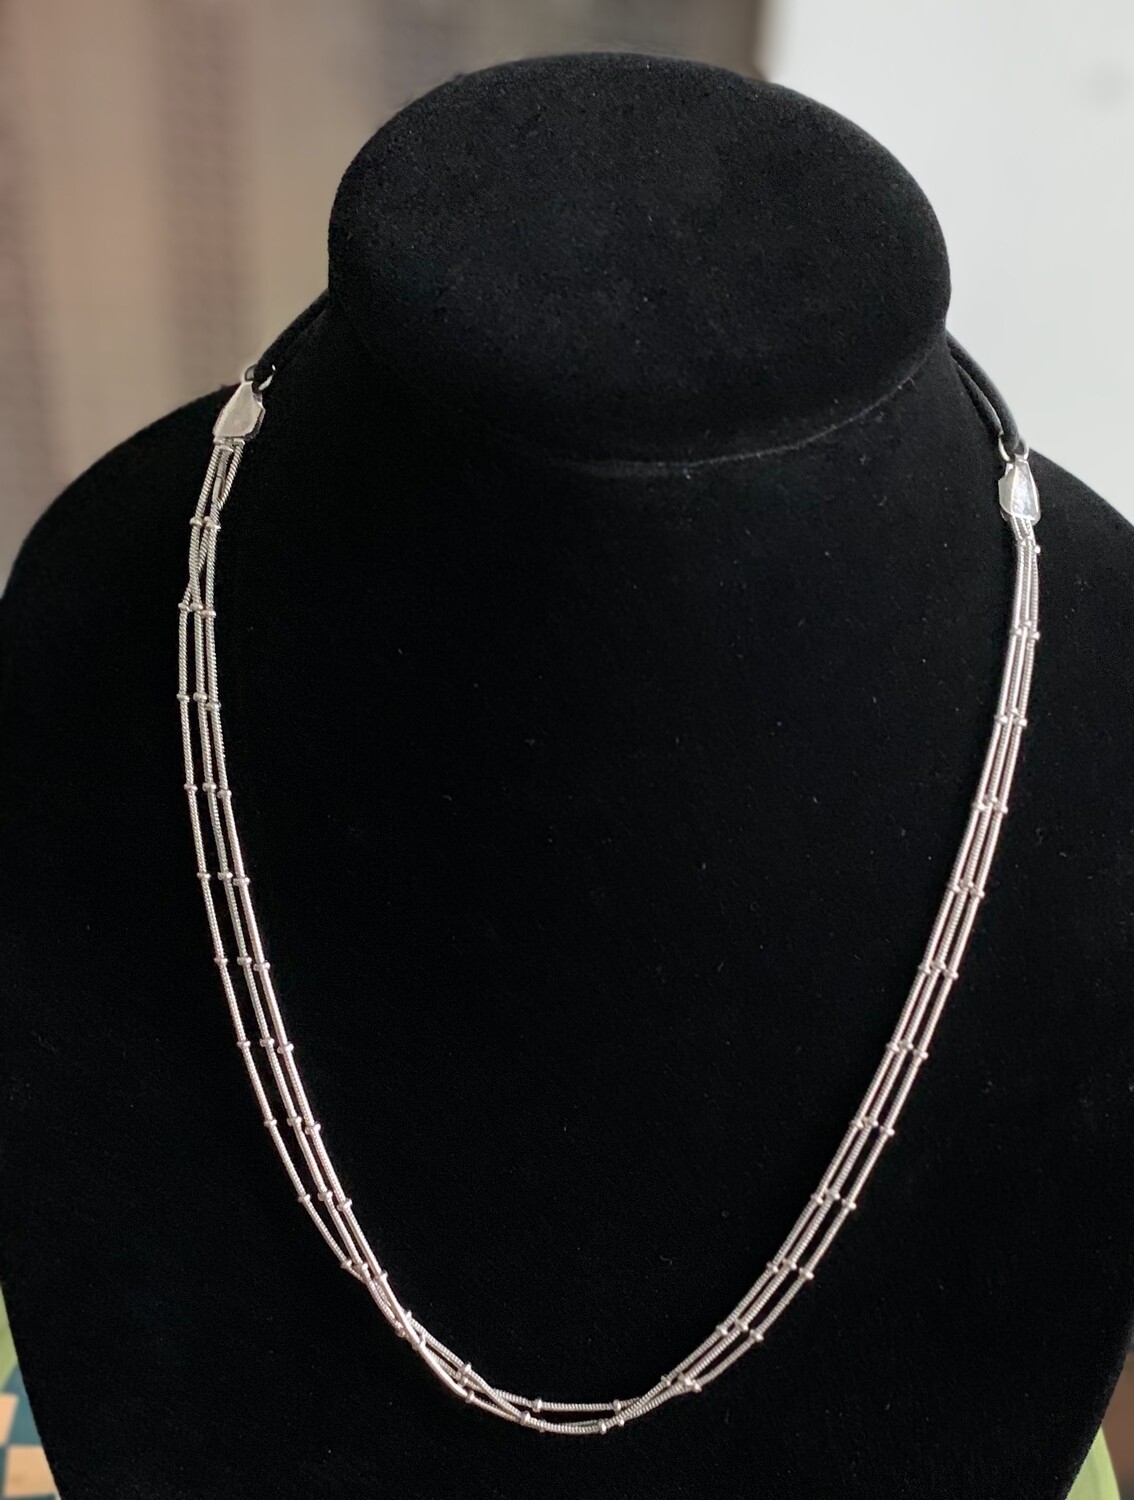 Elastic Stretchy Black Cord Silver Necklace 